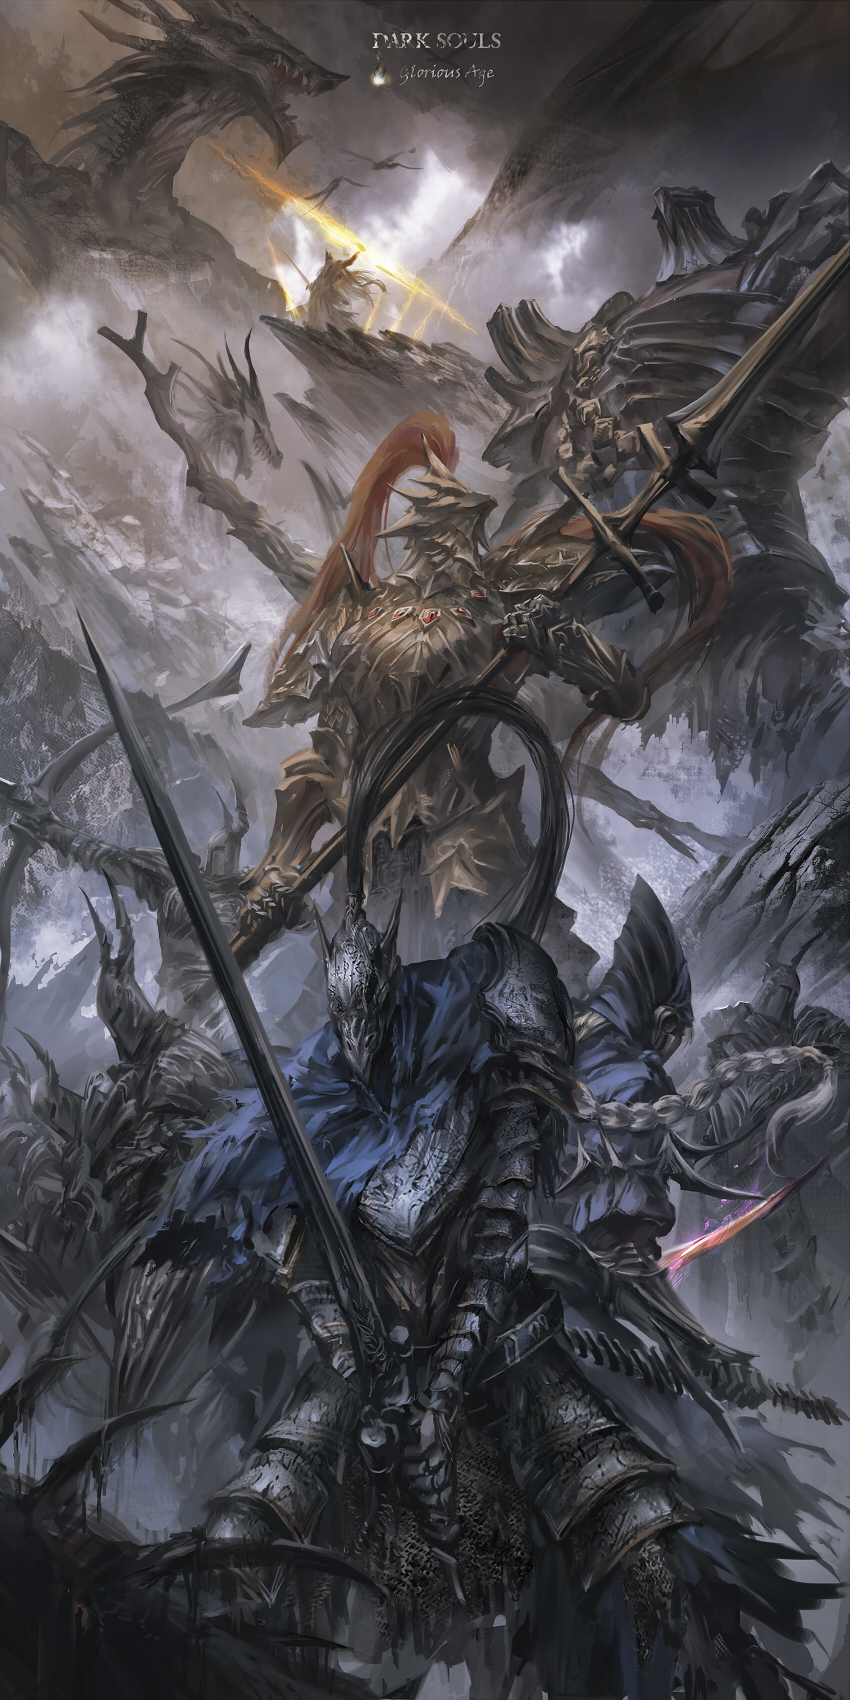 1girl 4boys 5others aiming armor artorias_the_abysswalker back-to-back battle blonde_hair blue_capelet bow_(weapon) braid breastplate capelet copyright_name crown dark_souls dragon dragon_slayer_ornstein dual_wielding electricity english_commentary english_text epic facing_away facing_viewer faulds fighting_stance flying full_armor gauntlets glowing glowing_weapon gold_armor gwyn_lord_of_cinder hawkeye_gough helmet highres holding holding_bow_(weapon) holding_spear holding_weapon hood horned_helmet knight looking_up lord's_blade_ciaran magic multiple_boys multiple_others open_mouth pauldrons plume polearm reverse_grip short_sword shoulder_armor silver_knight_(dark_souls) single_braid souls_(from_software) spear standing stu_dts sword teeth weapon